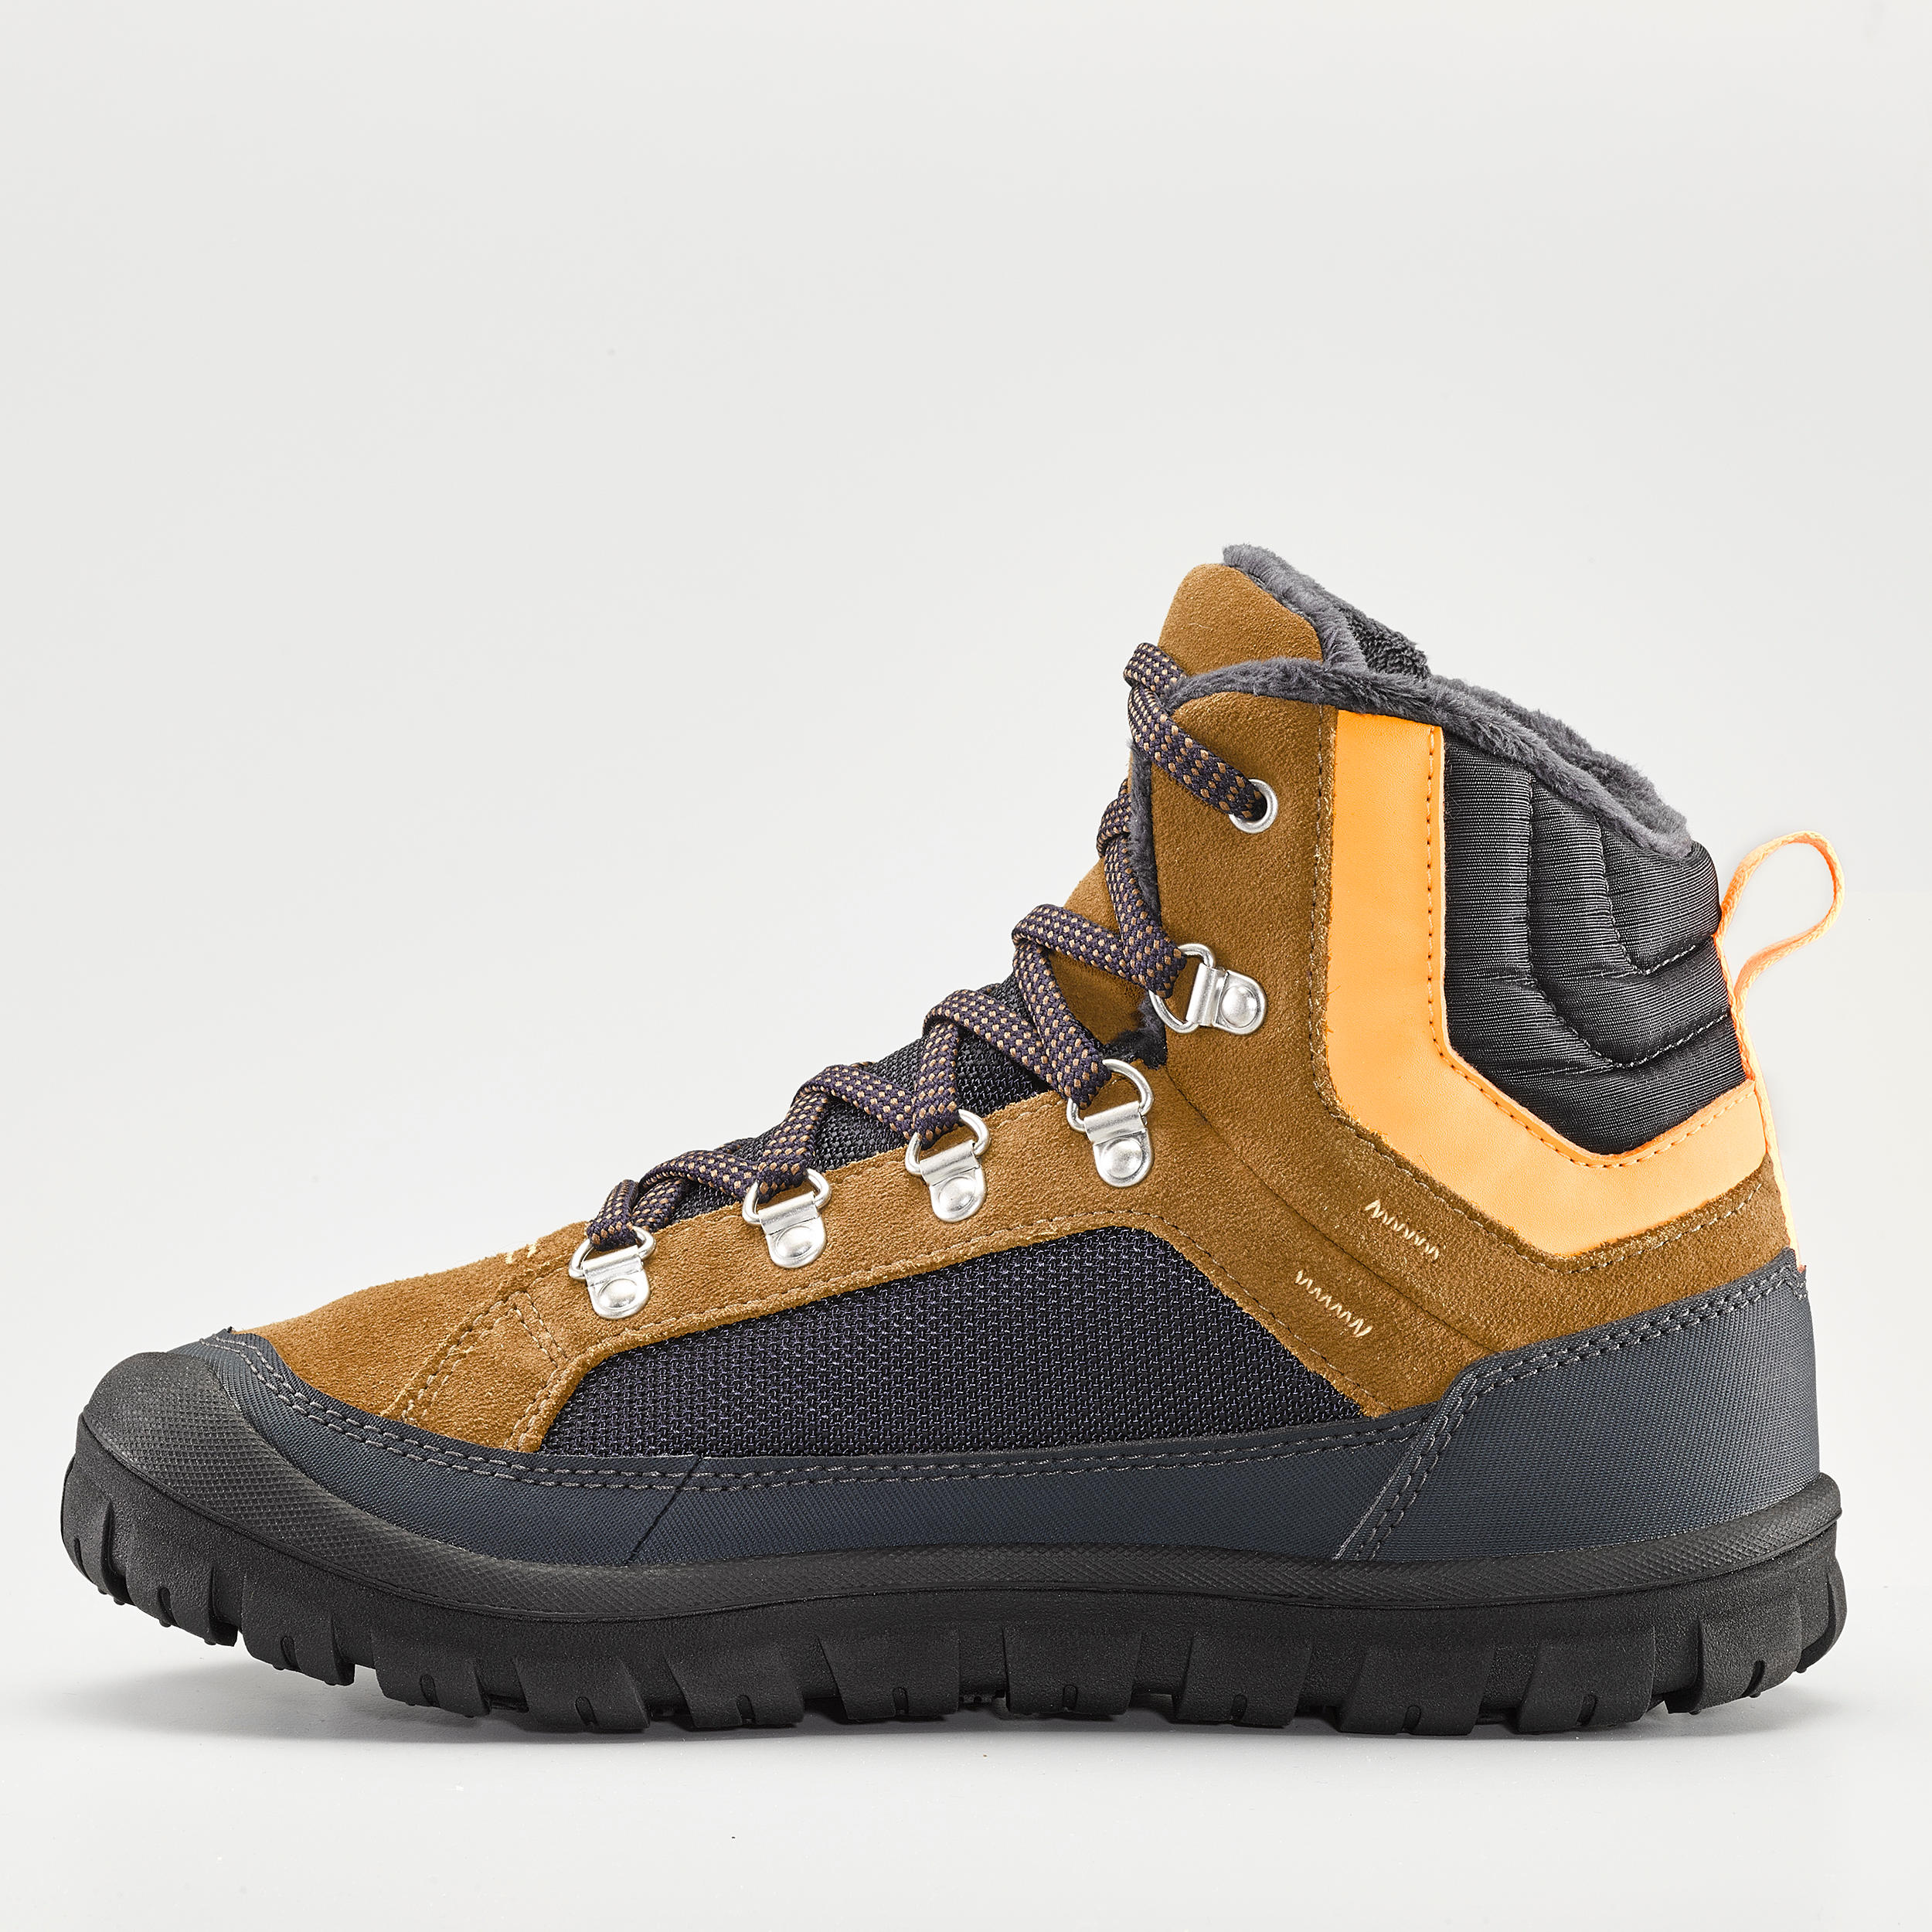 size up hiking boots